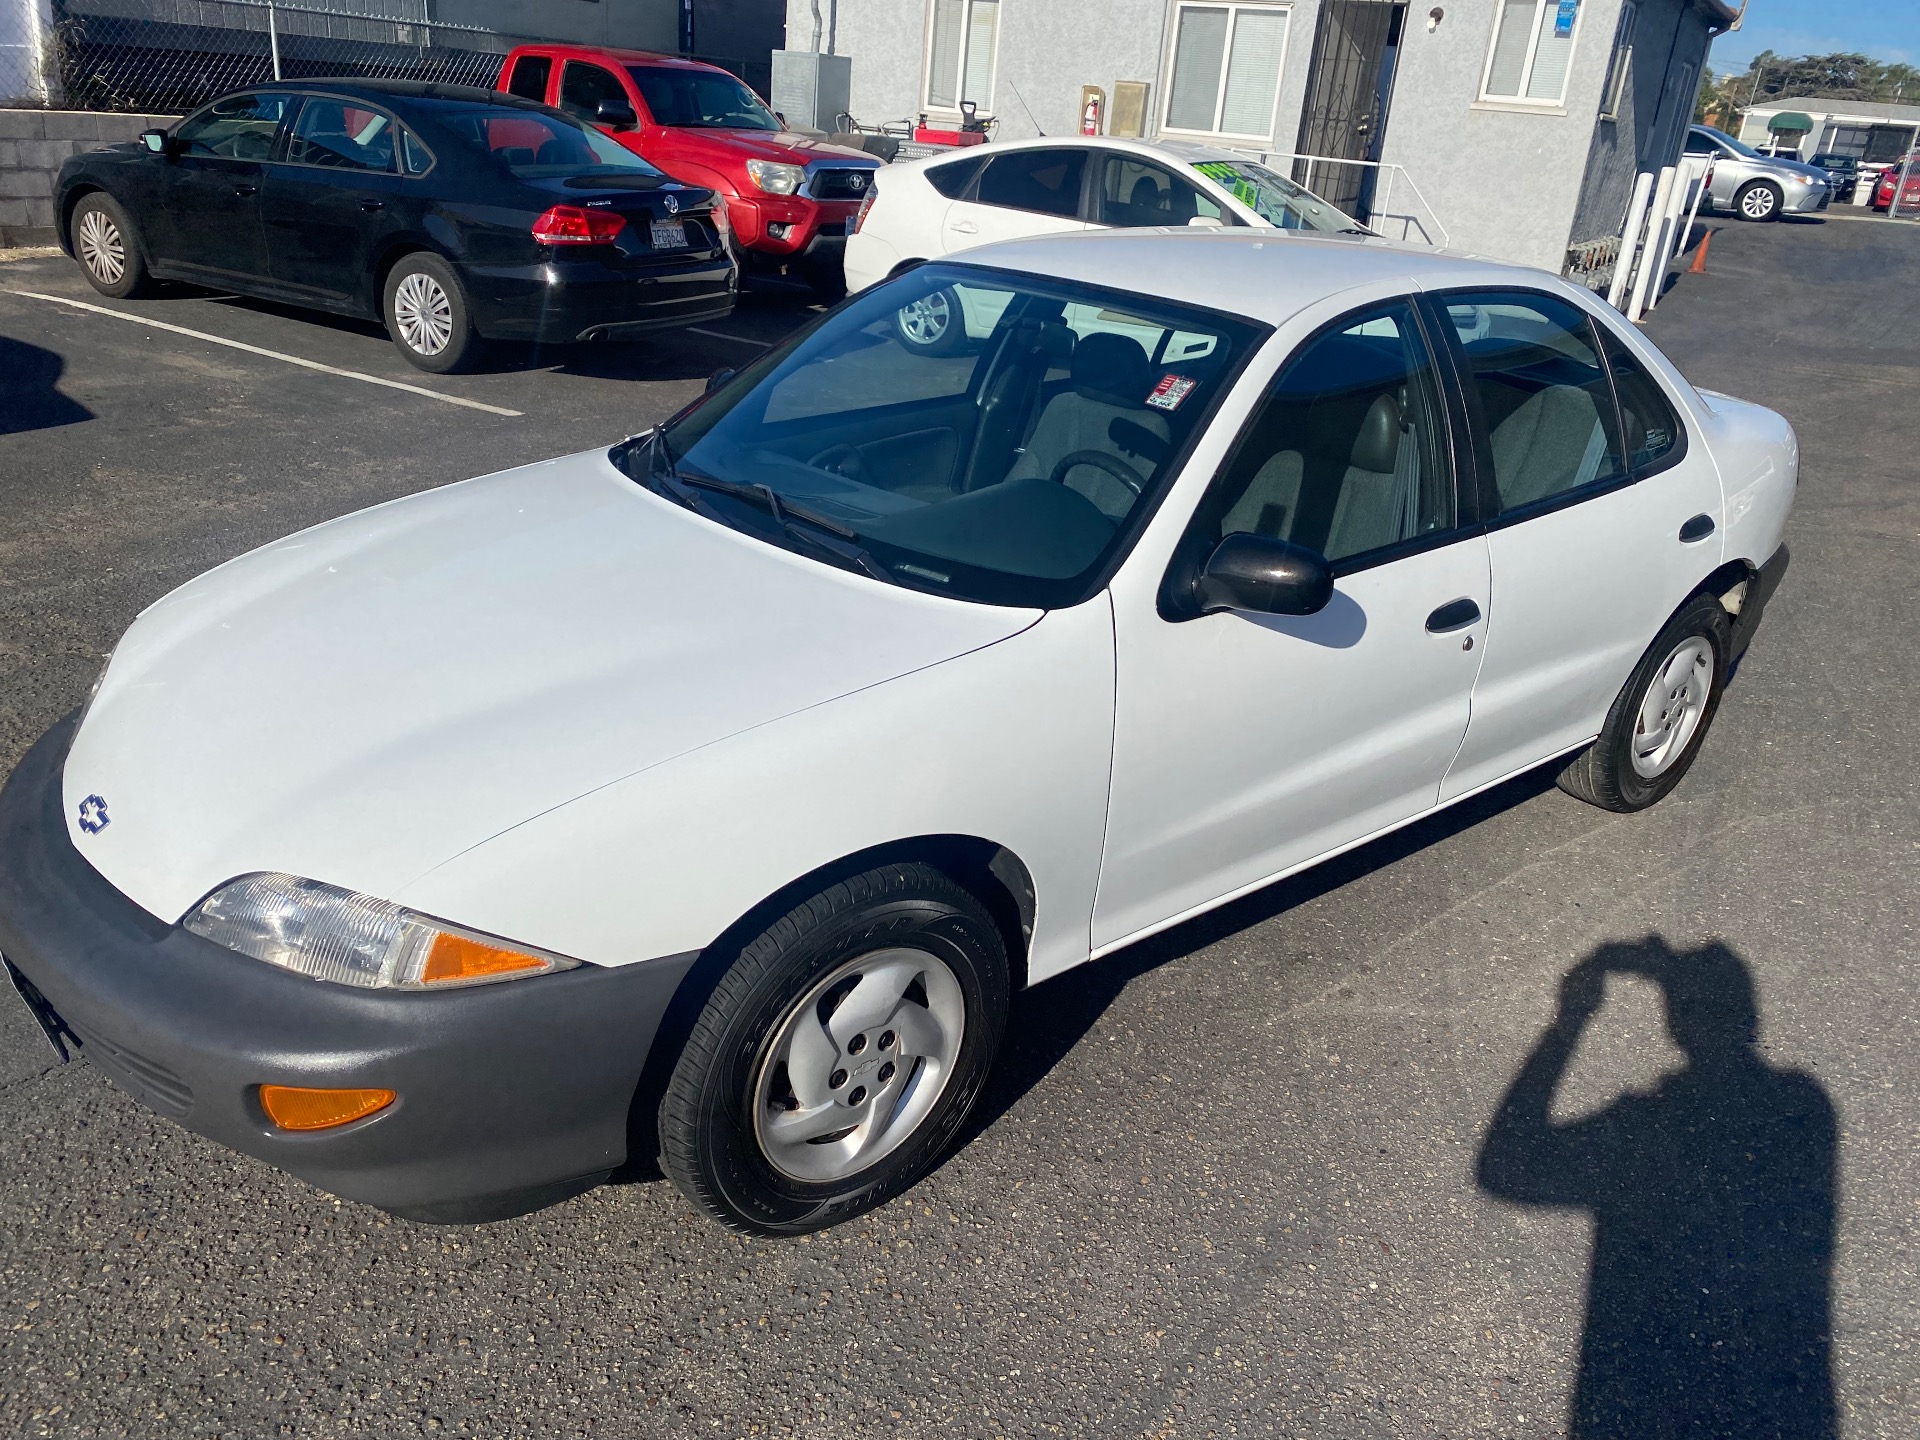 Used Chevrolet Cavalier's nationwide for sale - MotorCloud